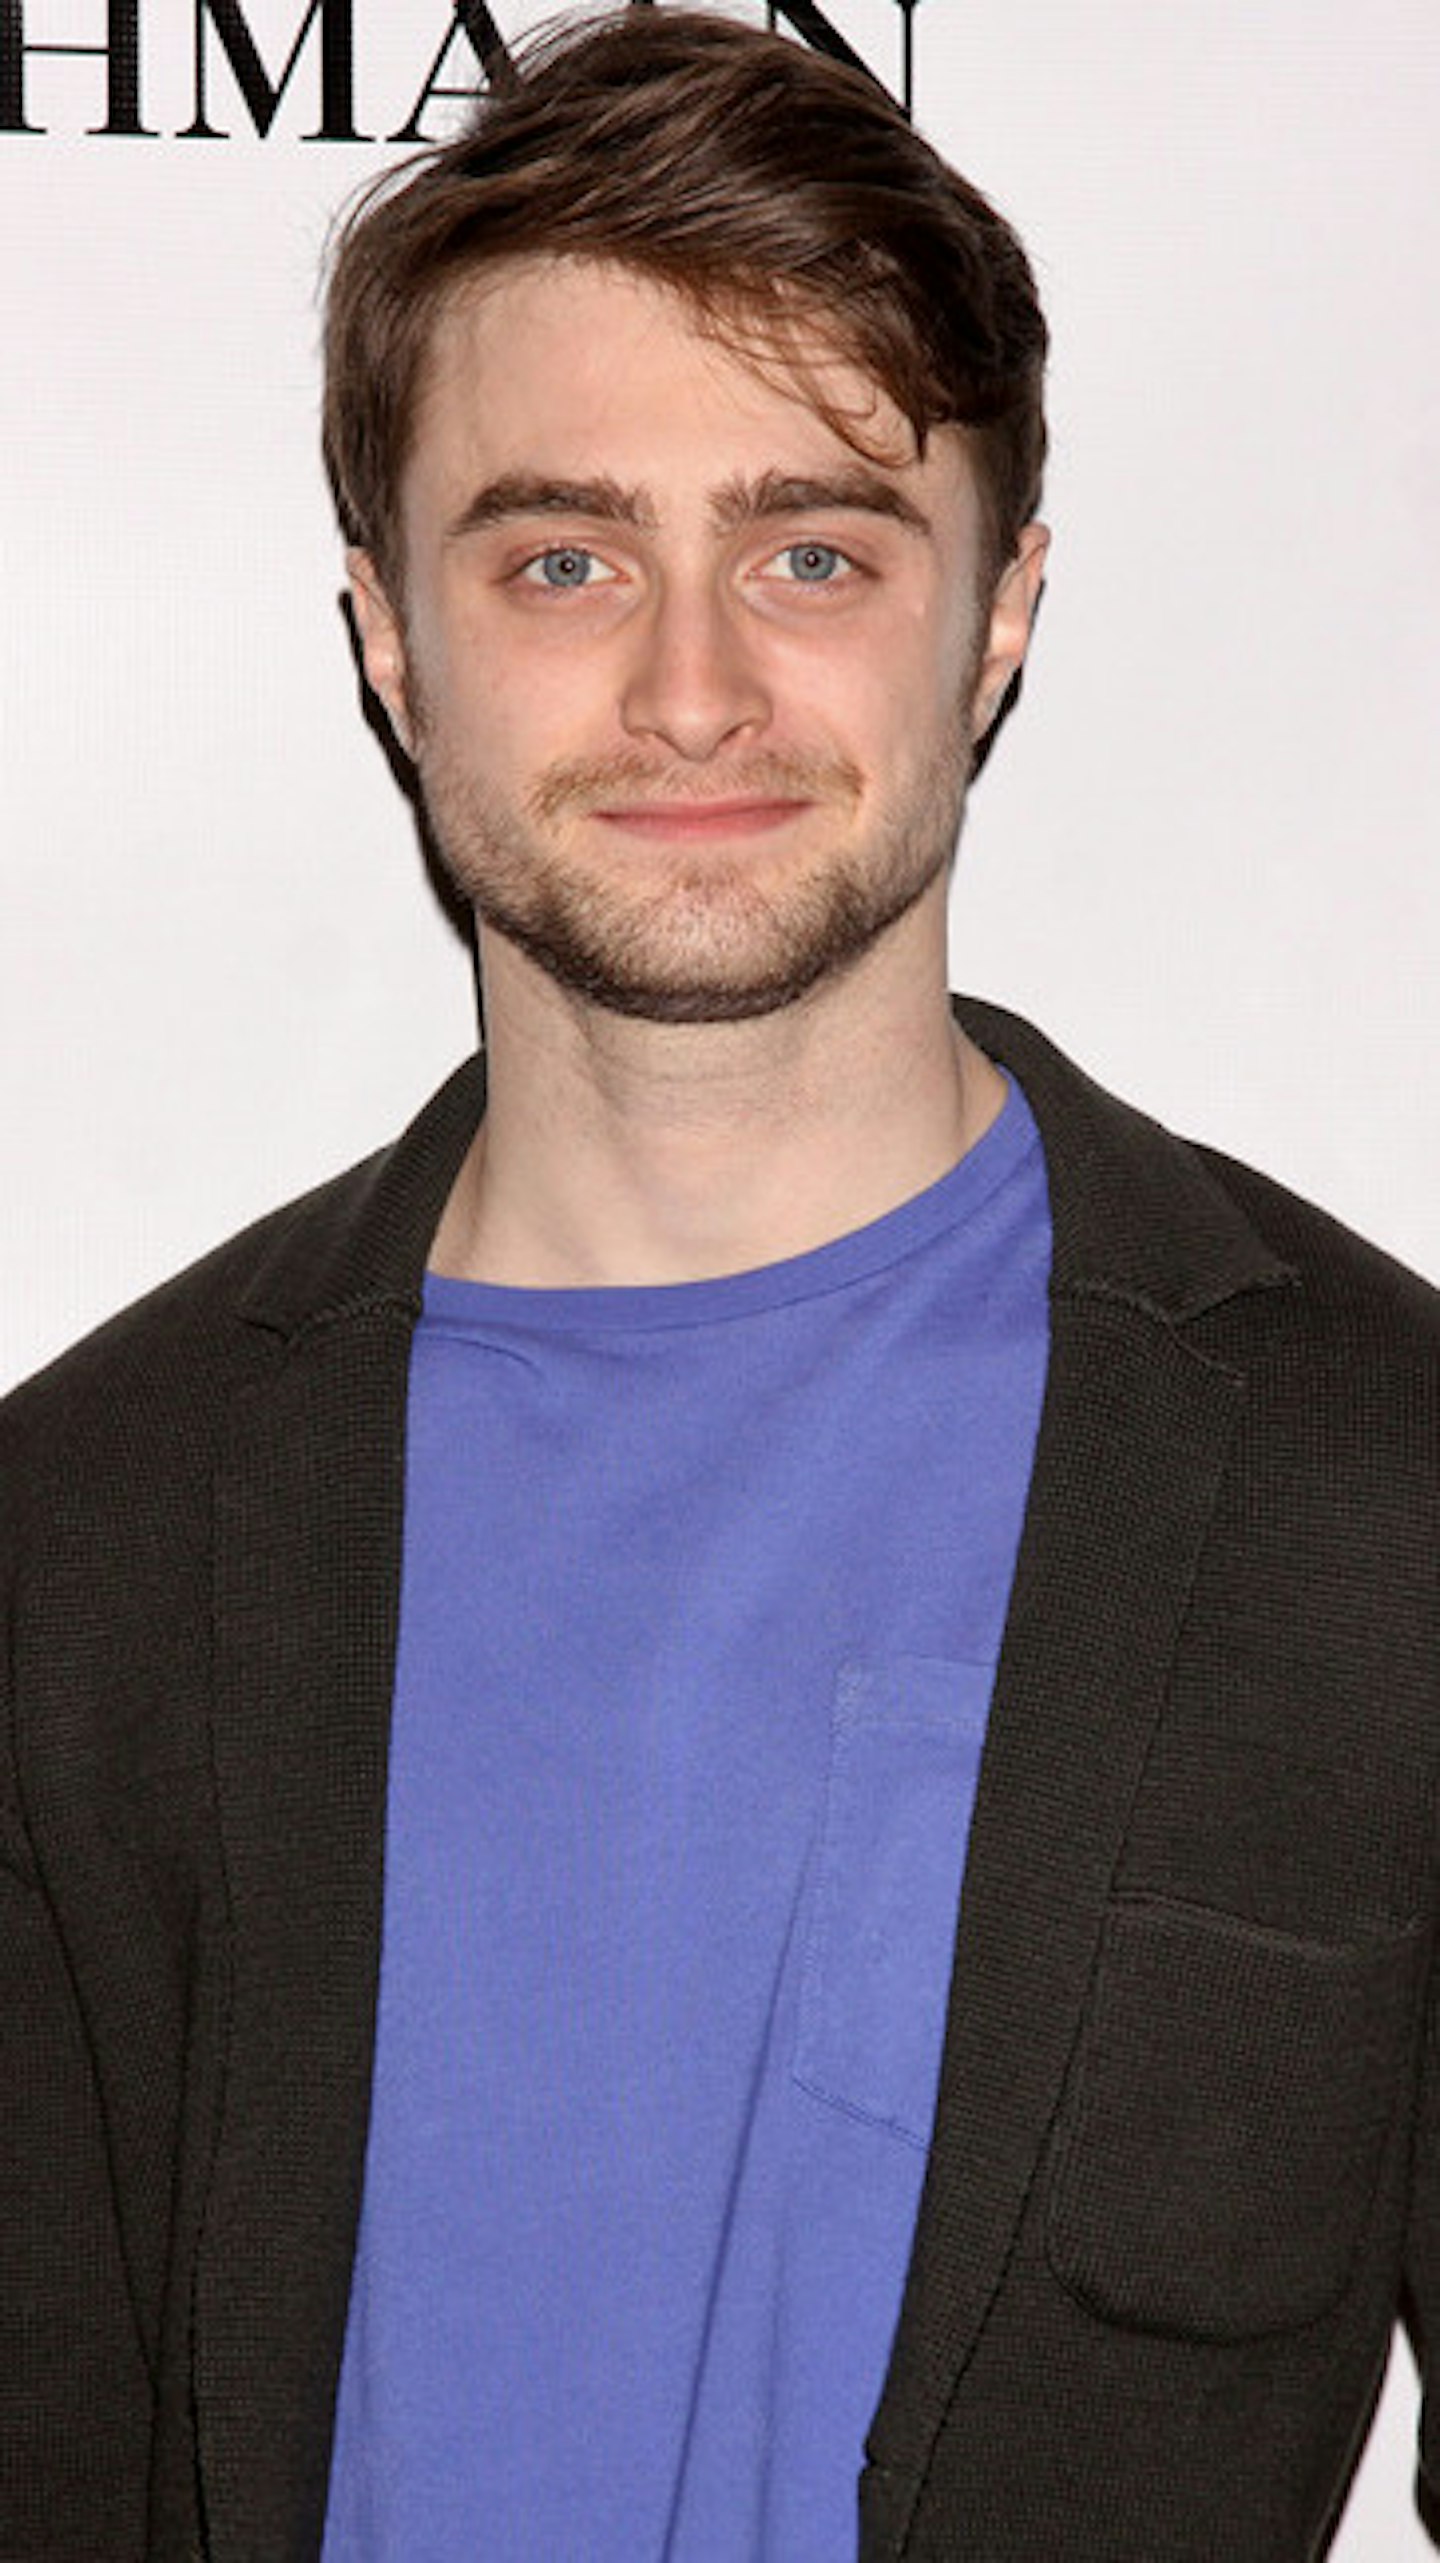 Daniel Radcliffe is currently working in New York